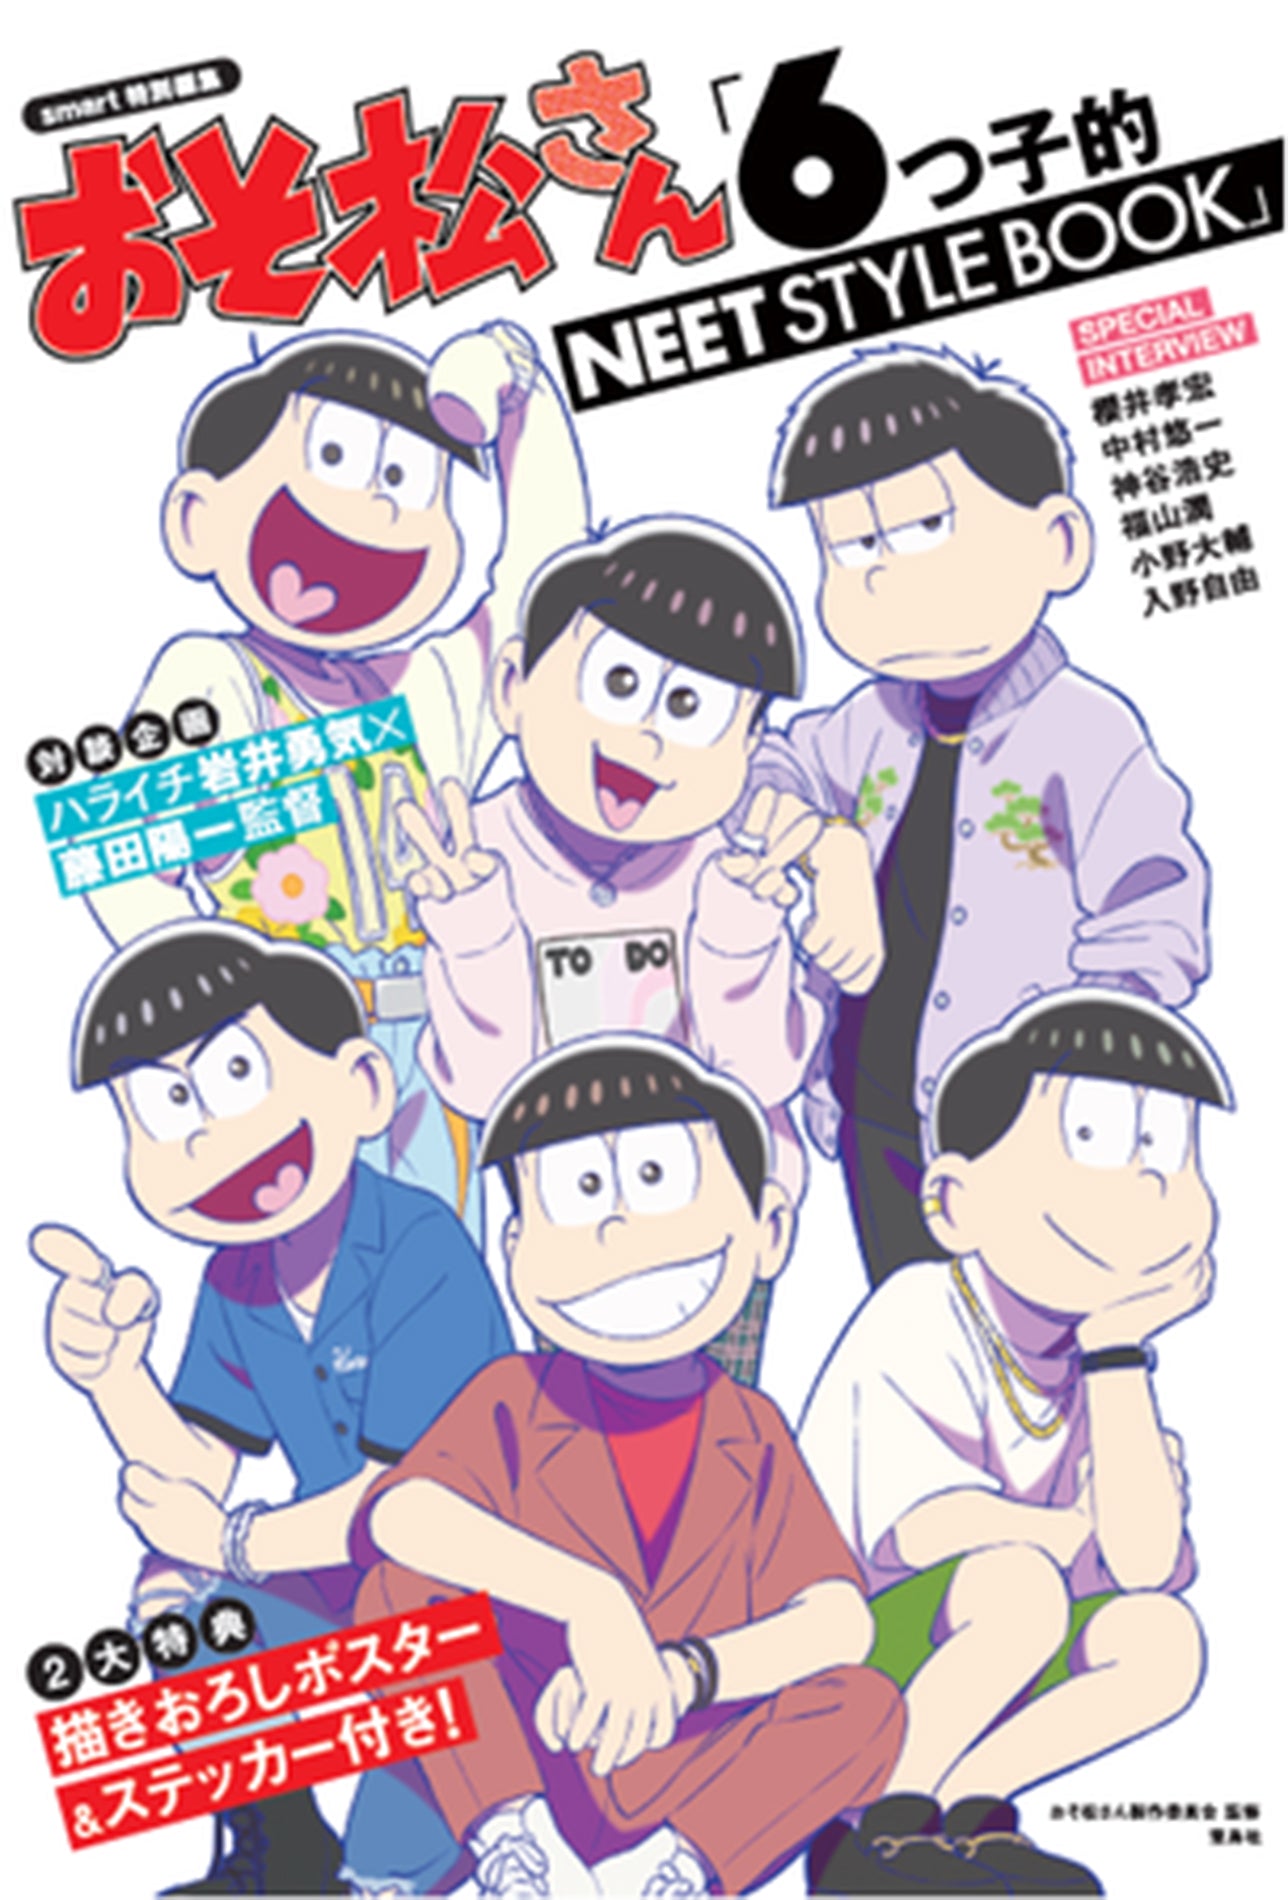 Listed Products on SMART Osomatsu-san「6つ子的NEET STYLE BOOK」